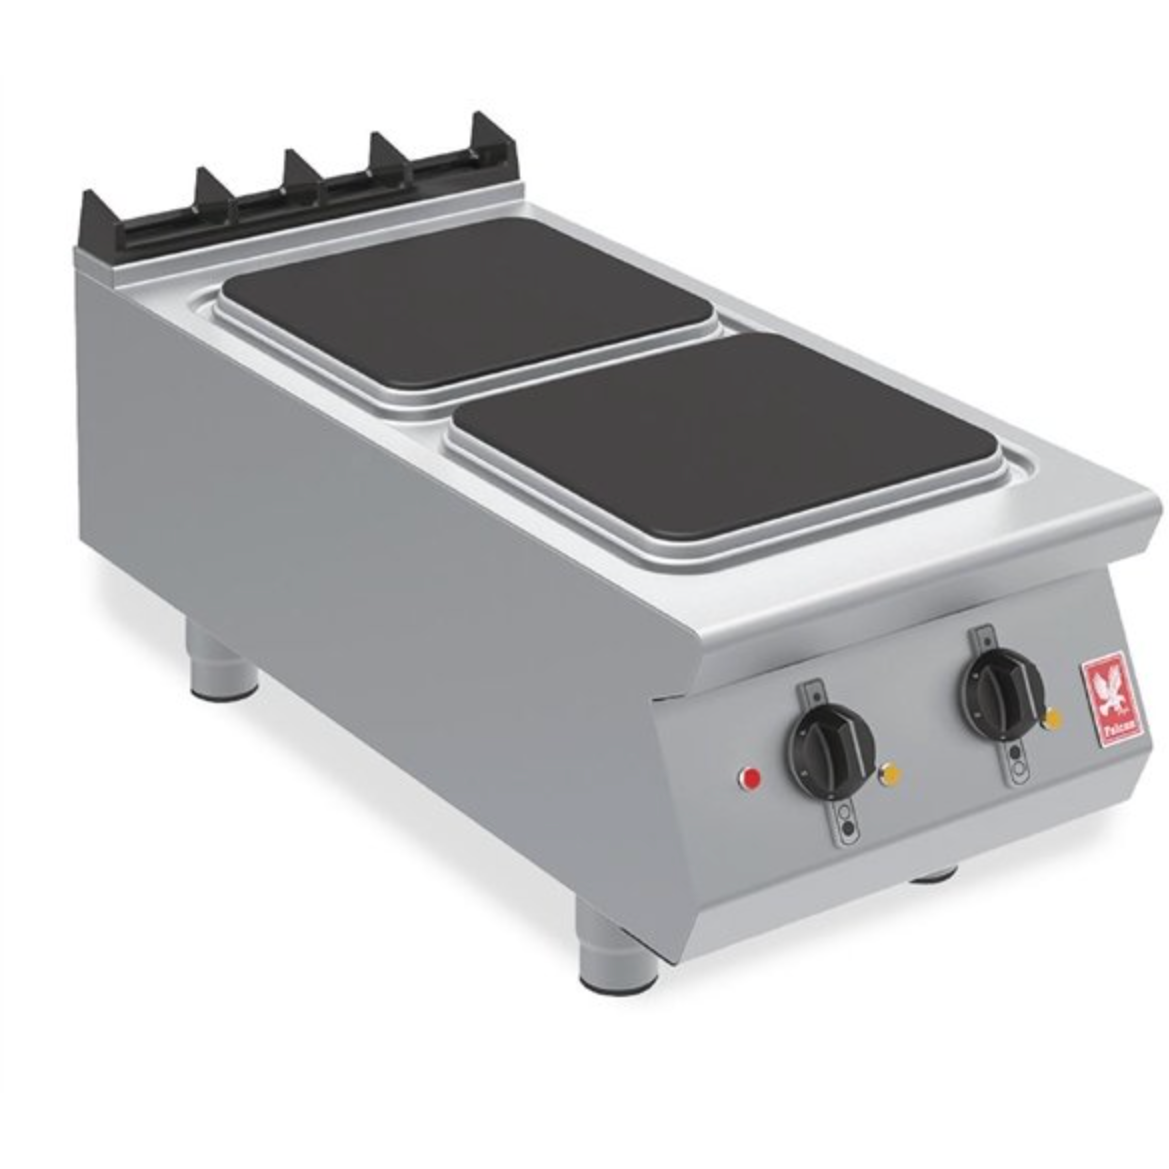 Falcon F900 Series E9042 Countertop Electric Two Hotplate Boiling Top 8kW